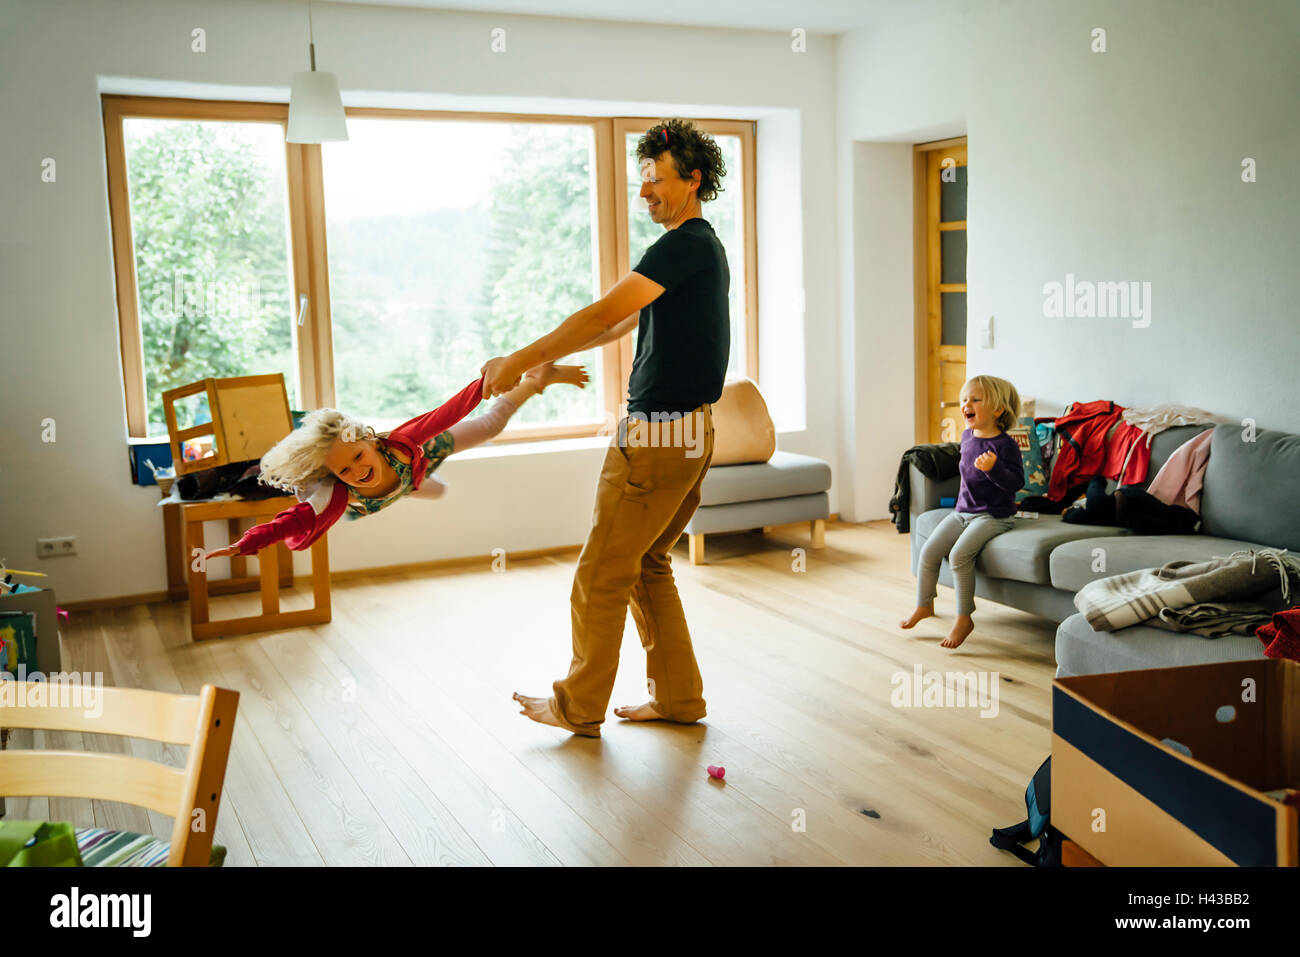 Caucasian father spinning daughter by arm and leg in livingroom Stock Photo